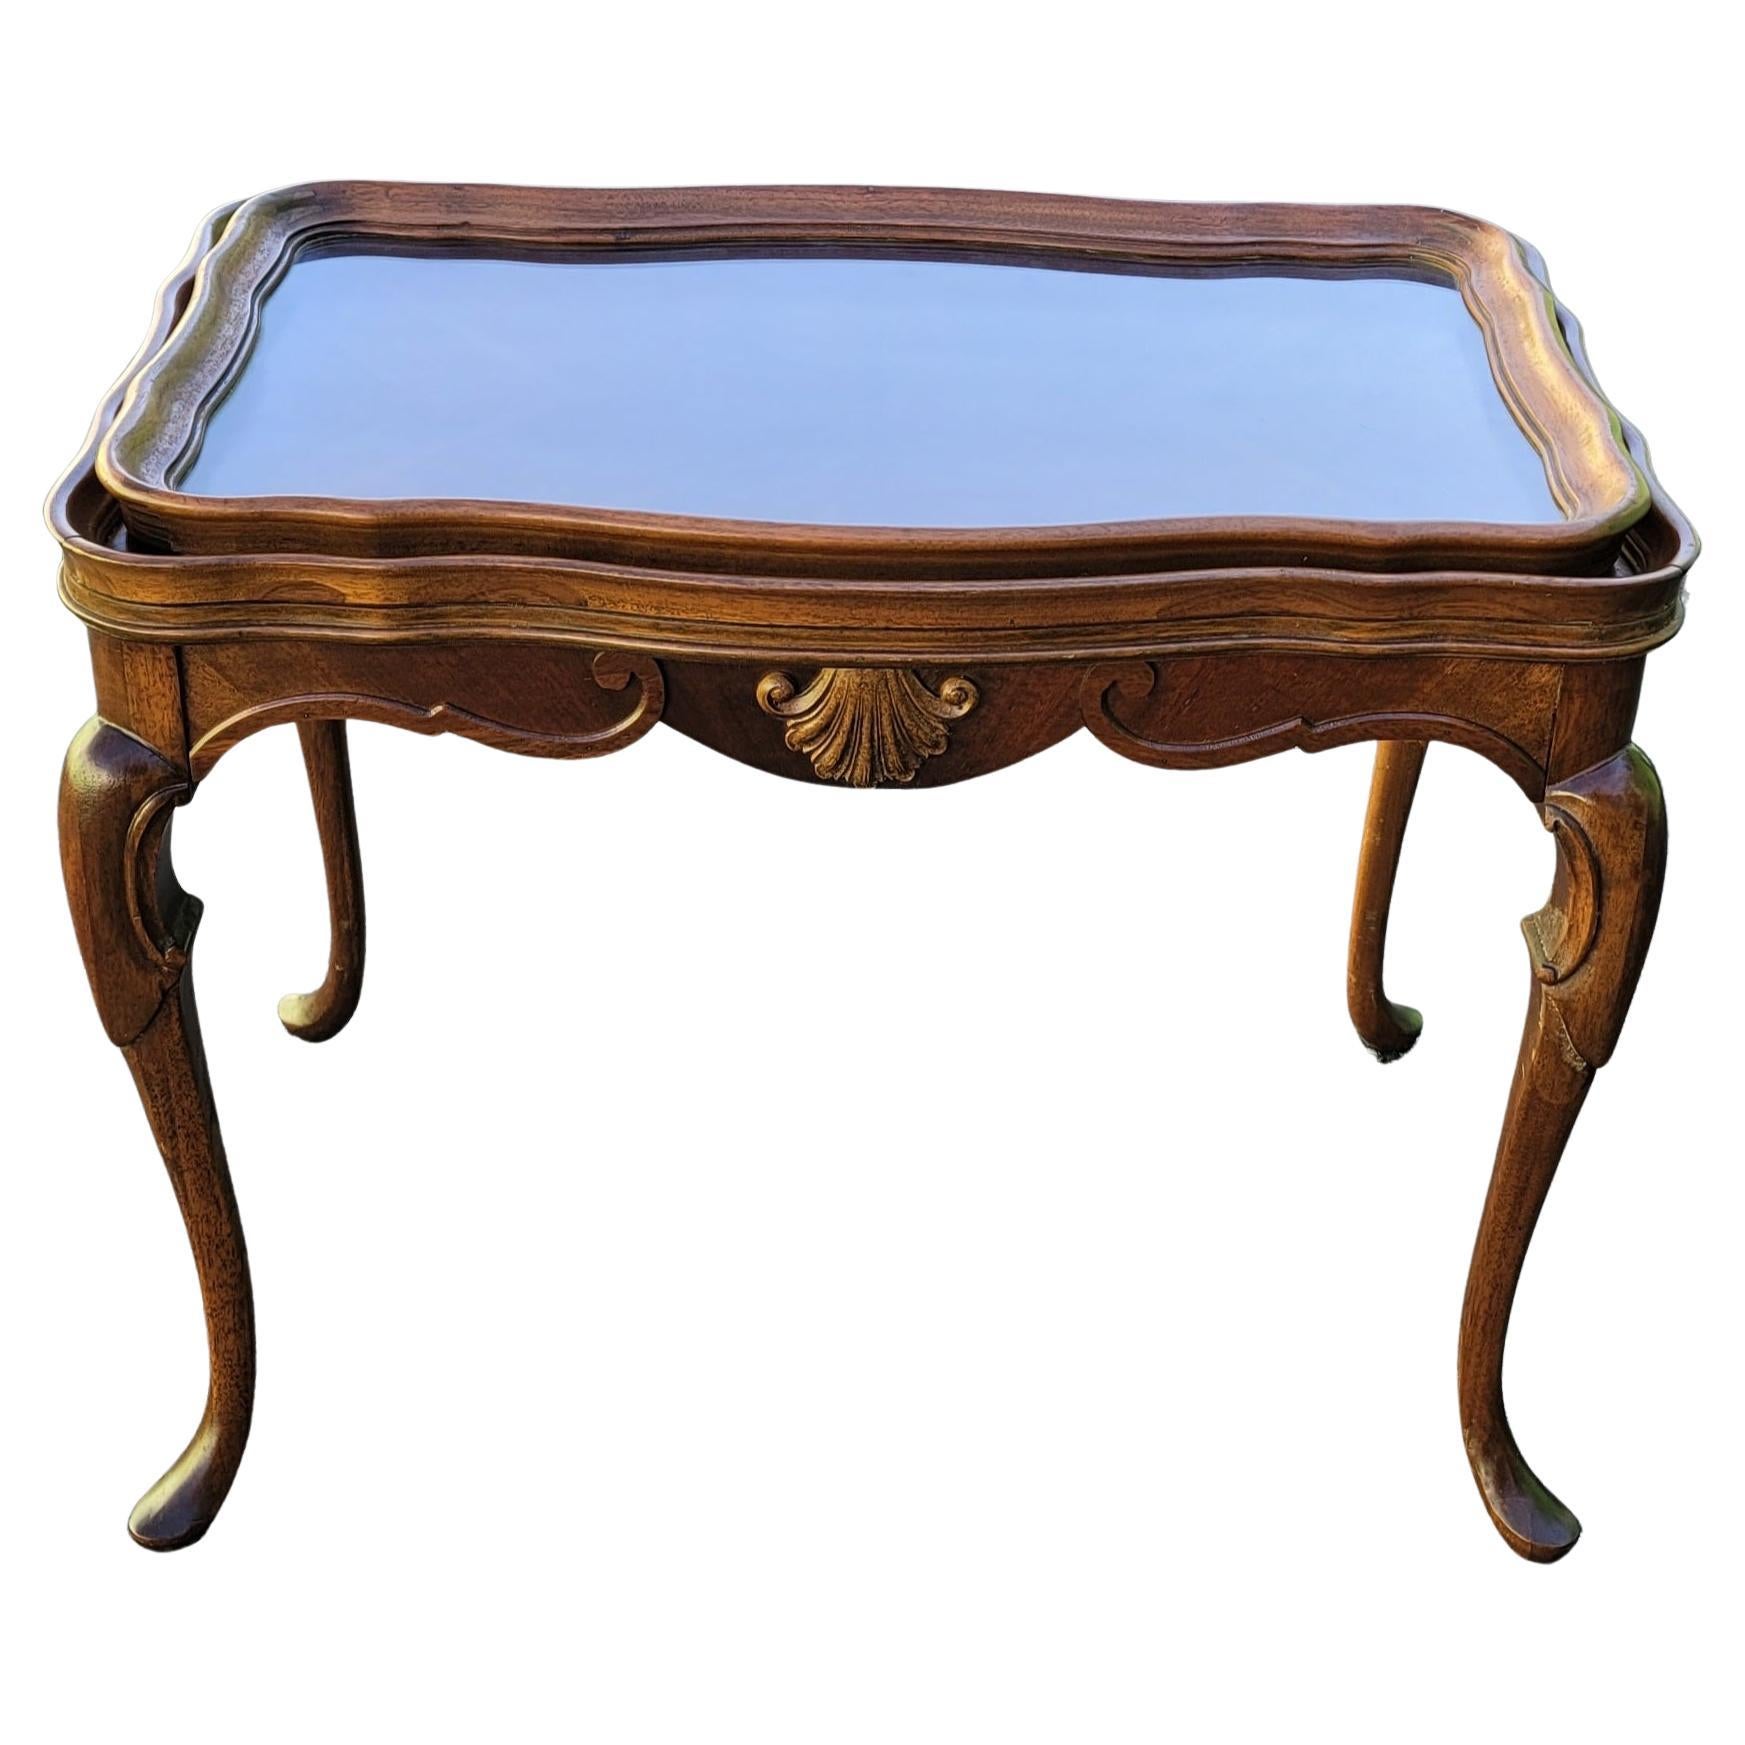 A charming 1940s George IV Style rectangularcarved mahogany glass tray top side table in great vintage condition.
Measures 25